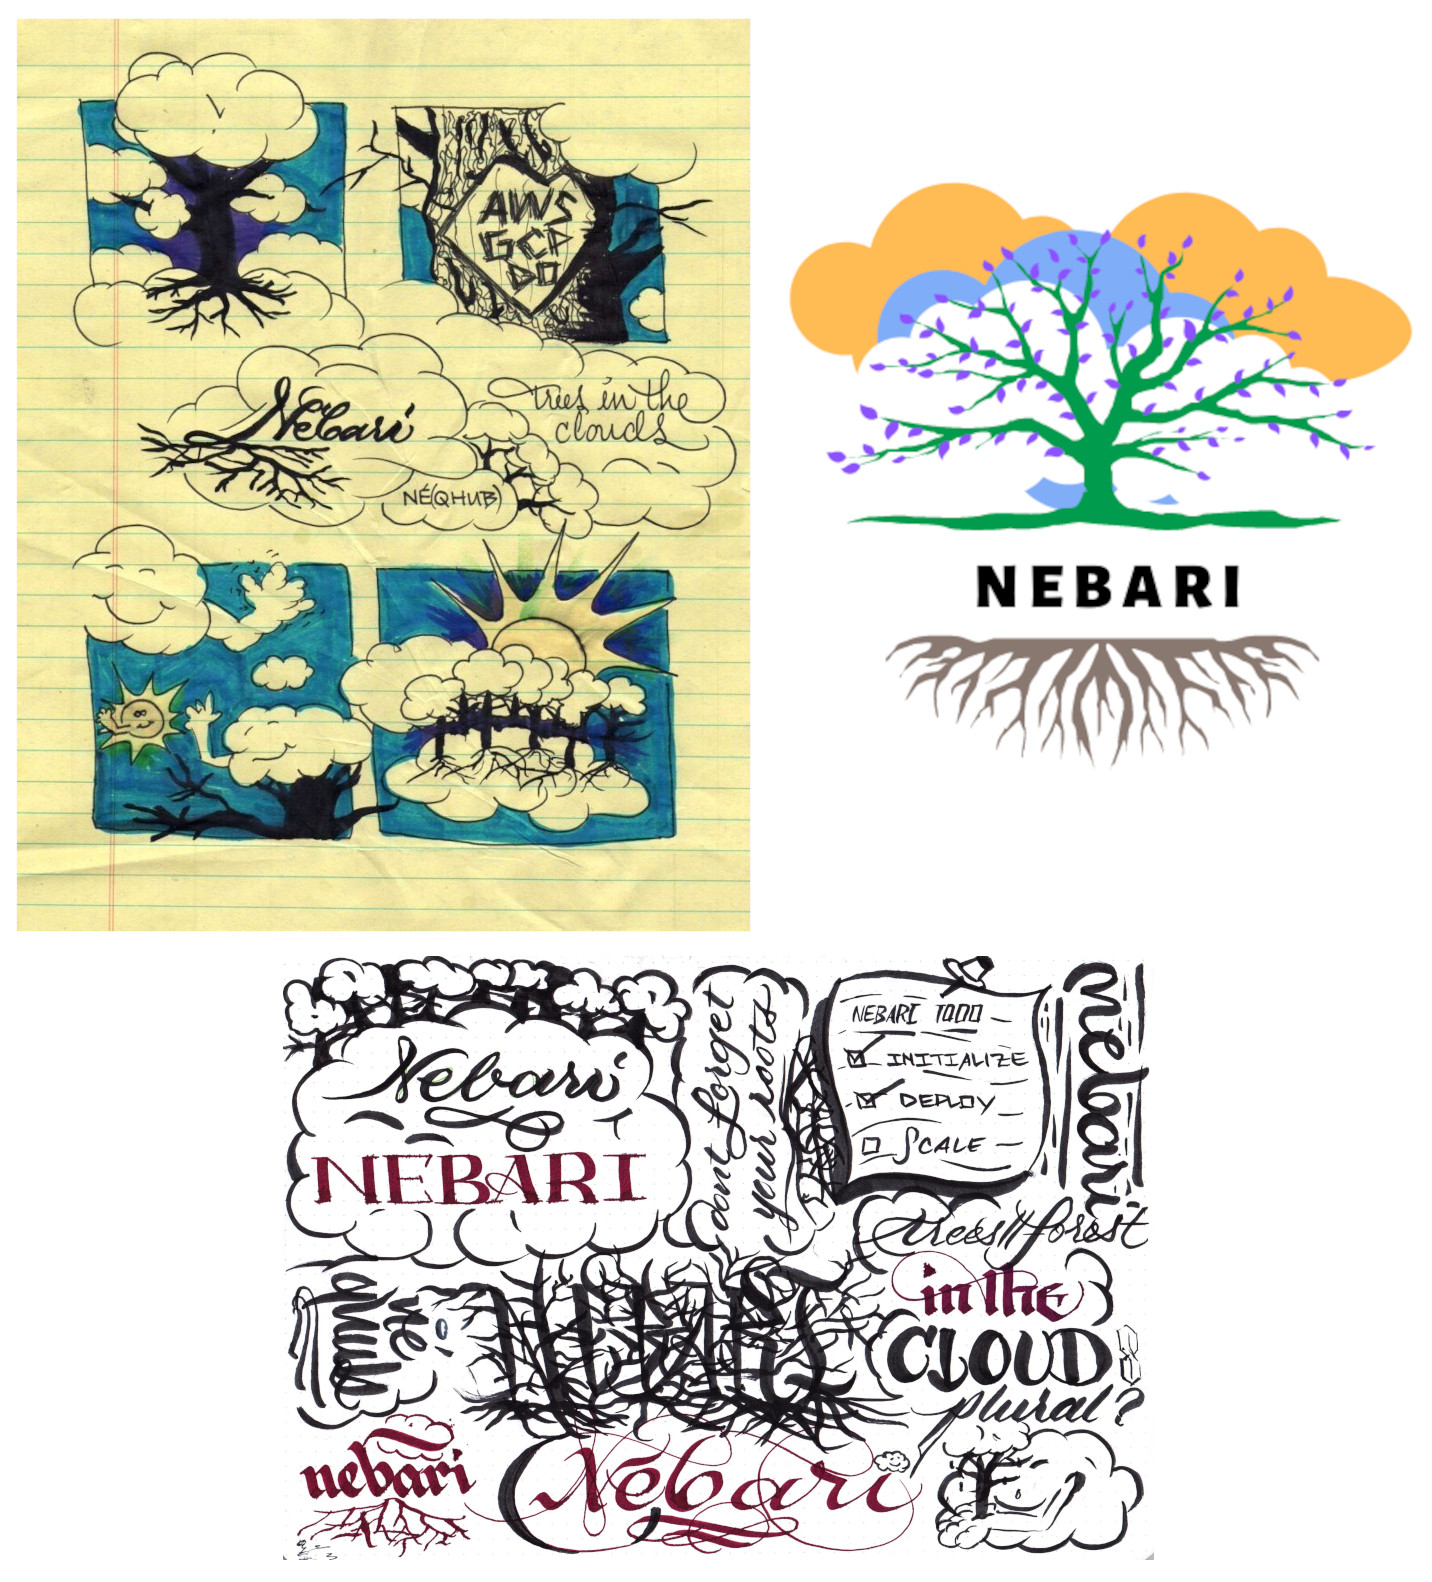 (Upper Left) Hand-drawn tree trunk(s) in the clouds, along with a concept for Nebari's logo where the base of N creates a root structure underneath it. (Upper Right) Concept for Nebari's logo. The word "NEBARI"  has a tree over it. the tree has lots of branches and leaves, and some with clouds behind it. Below the word, we see the tree's root structure. (Bottom) Different ideas for the font styles. Nebari is written by hand in block letters, types of cursives, and many more ways.